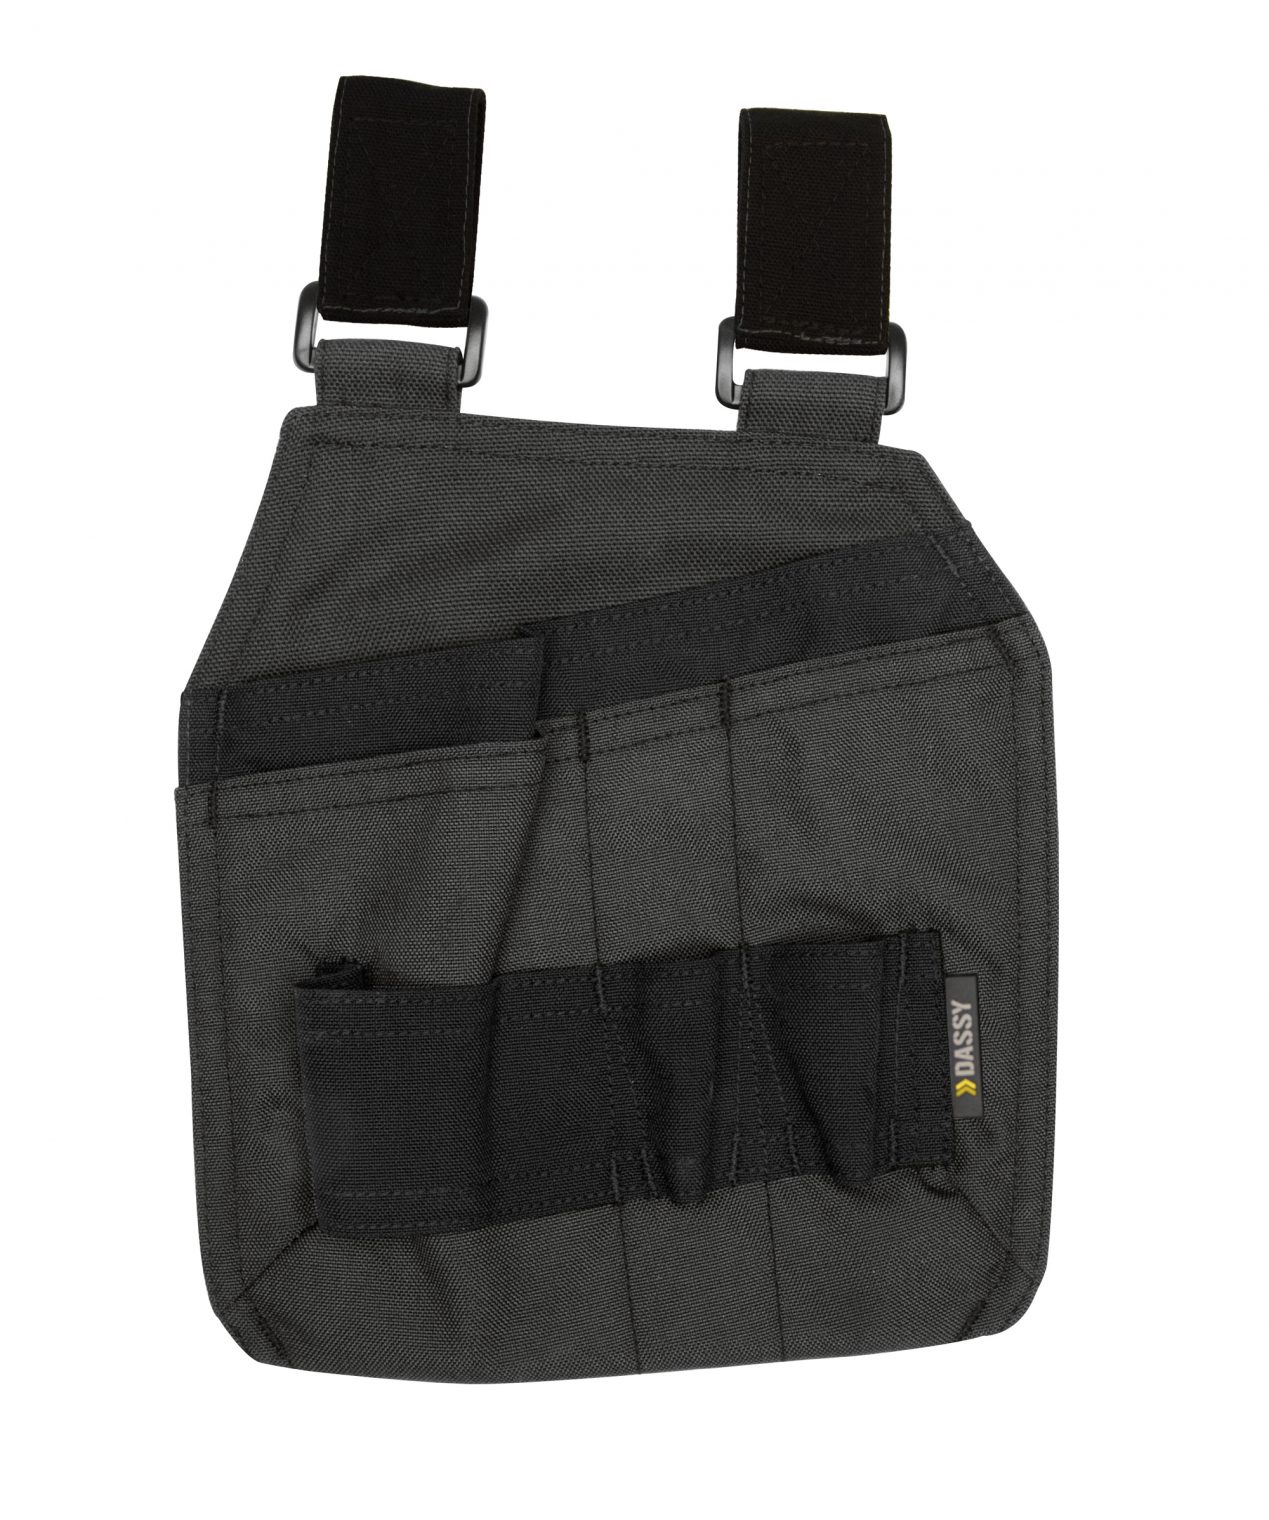 gordon with loops canvas tool pouches per pair with velcro loops anthracite grey black front